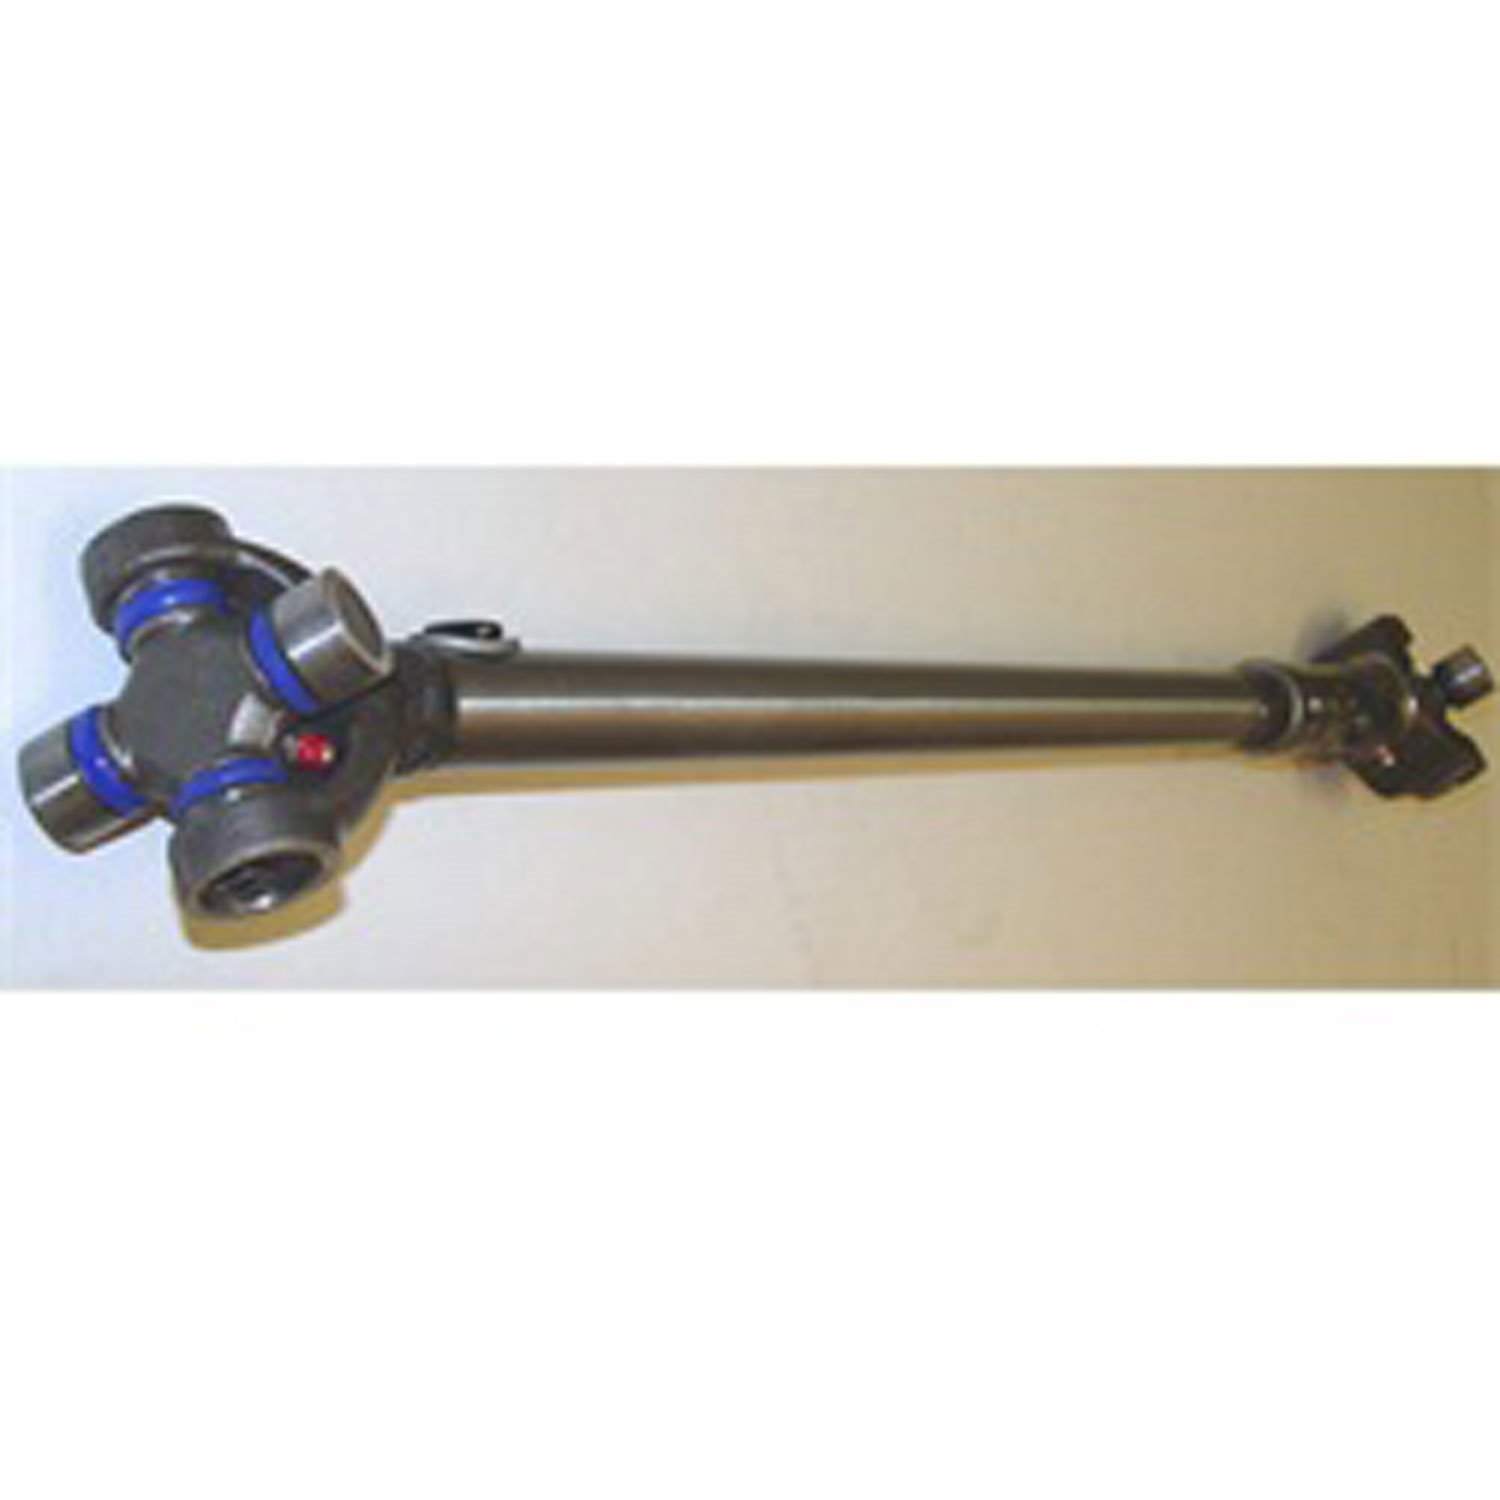 Stock replacement front driveshaft from Omix-ADA, Fits 76-79 Jeep CJ5 and CJ7 with a T150 manual transmission.